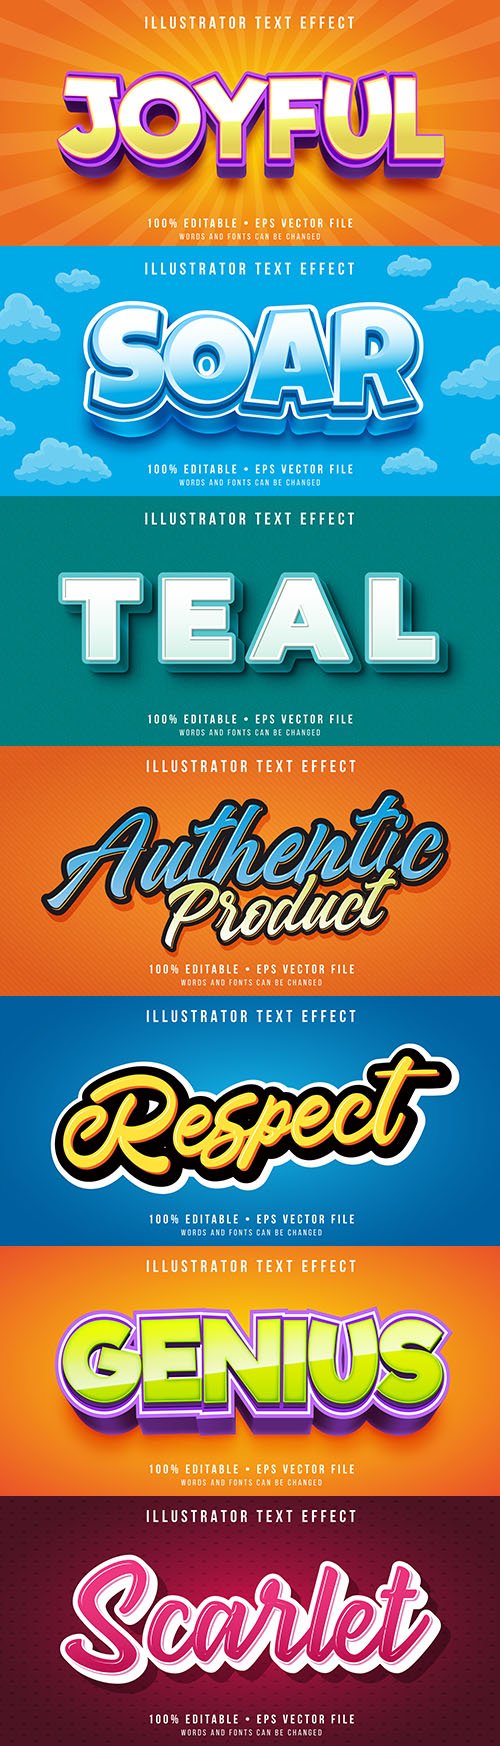 Editable font effect text collection illustration 26